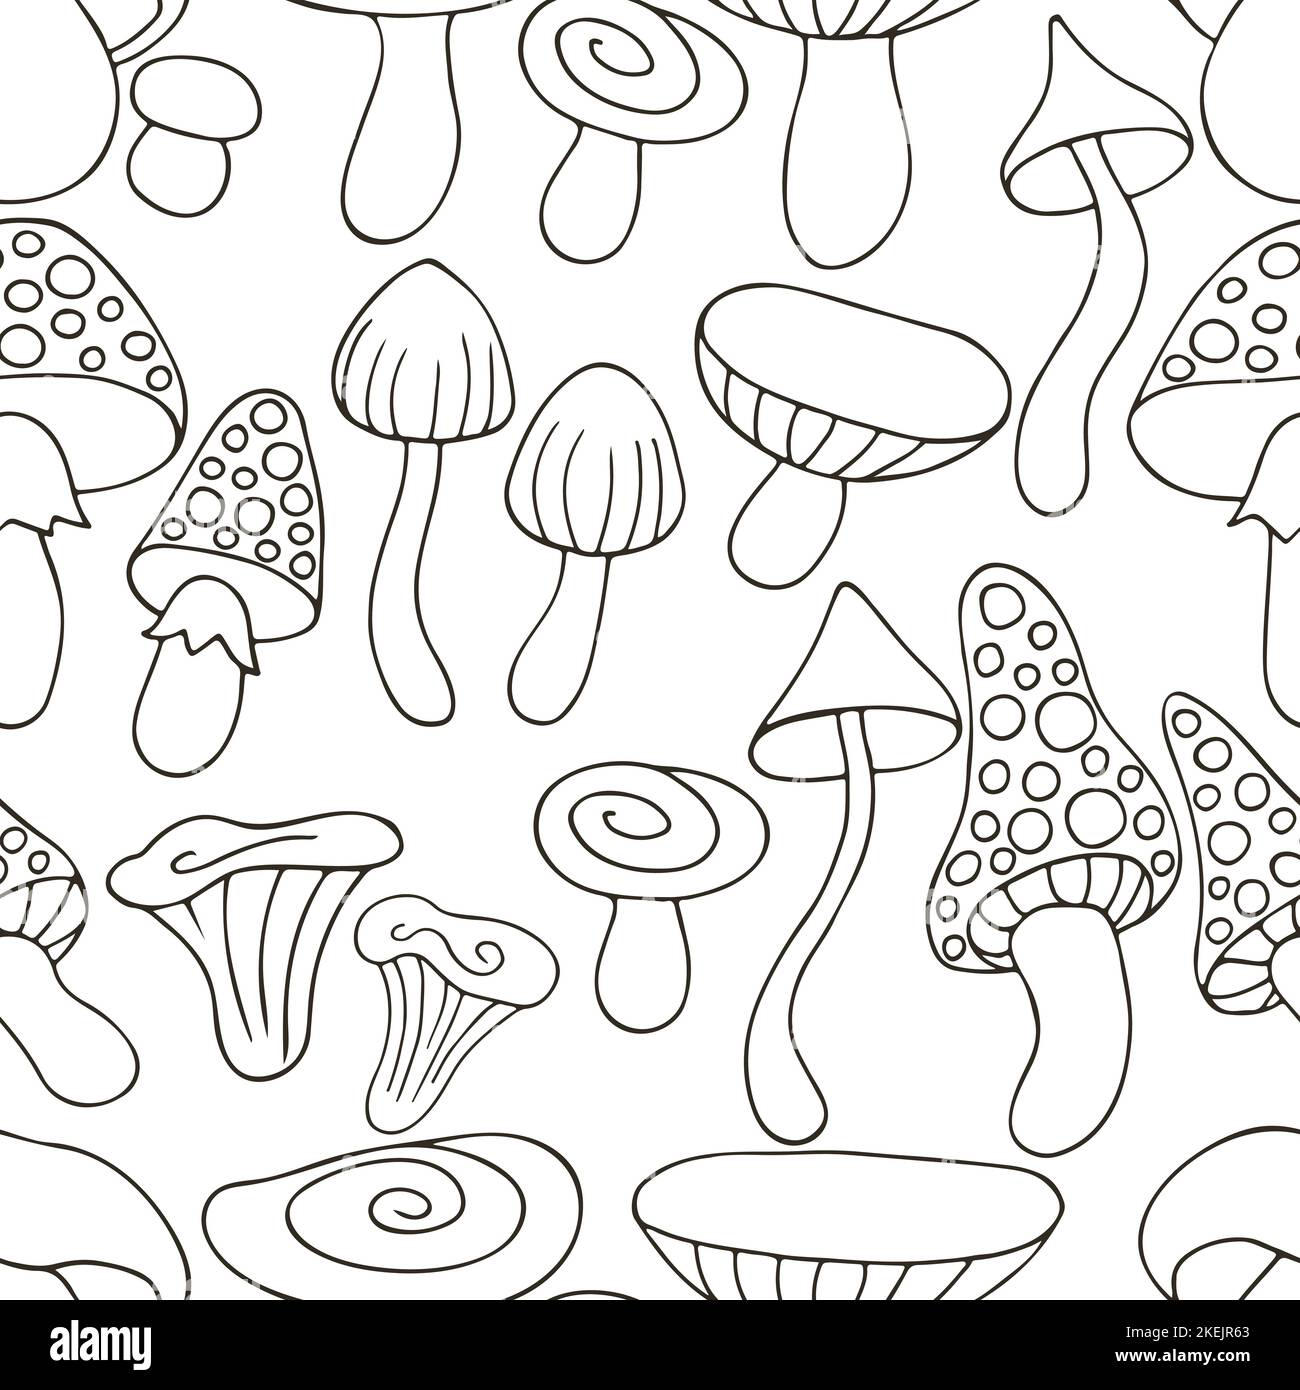 Mushroom autumn mood. Illustration in hand draw style. Seamless pattern with forest mushrooms. Can be used for fabric, packaging and etc Stock Vector